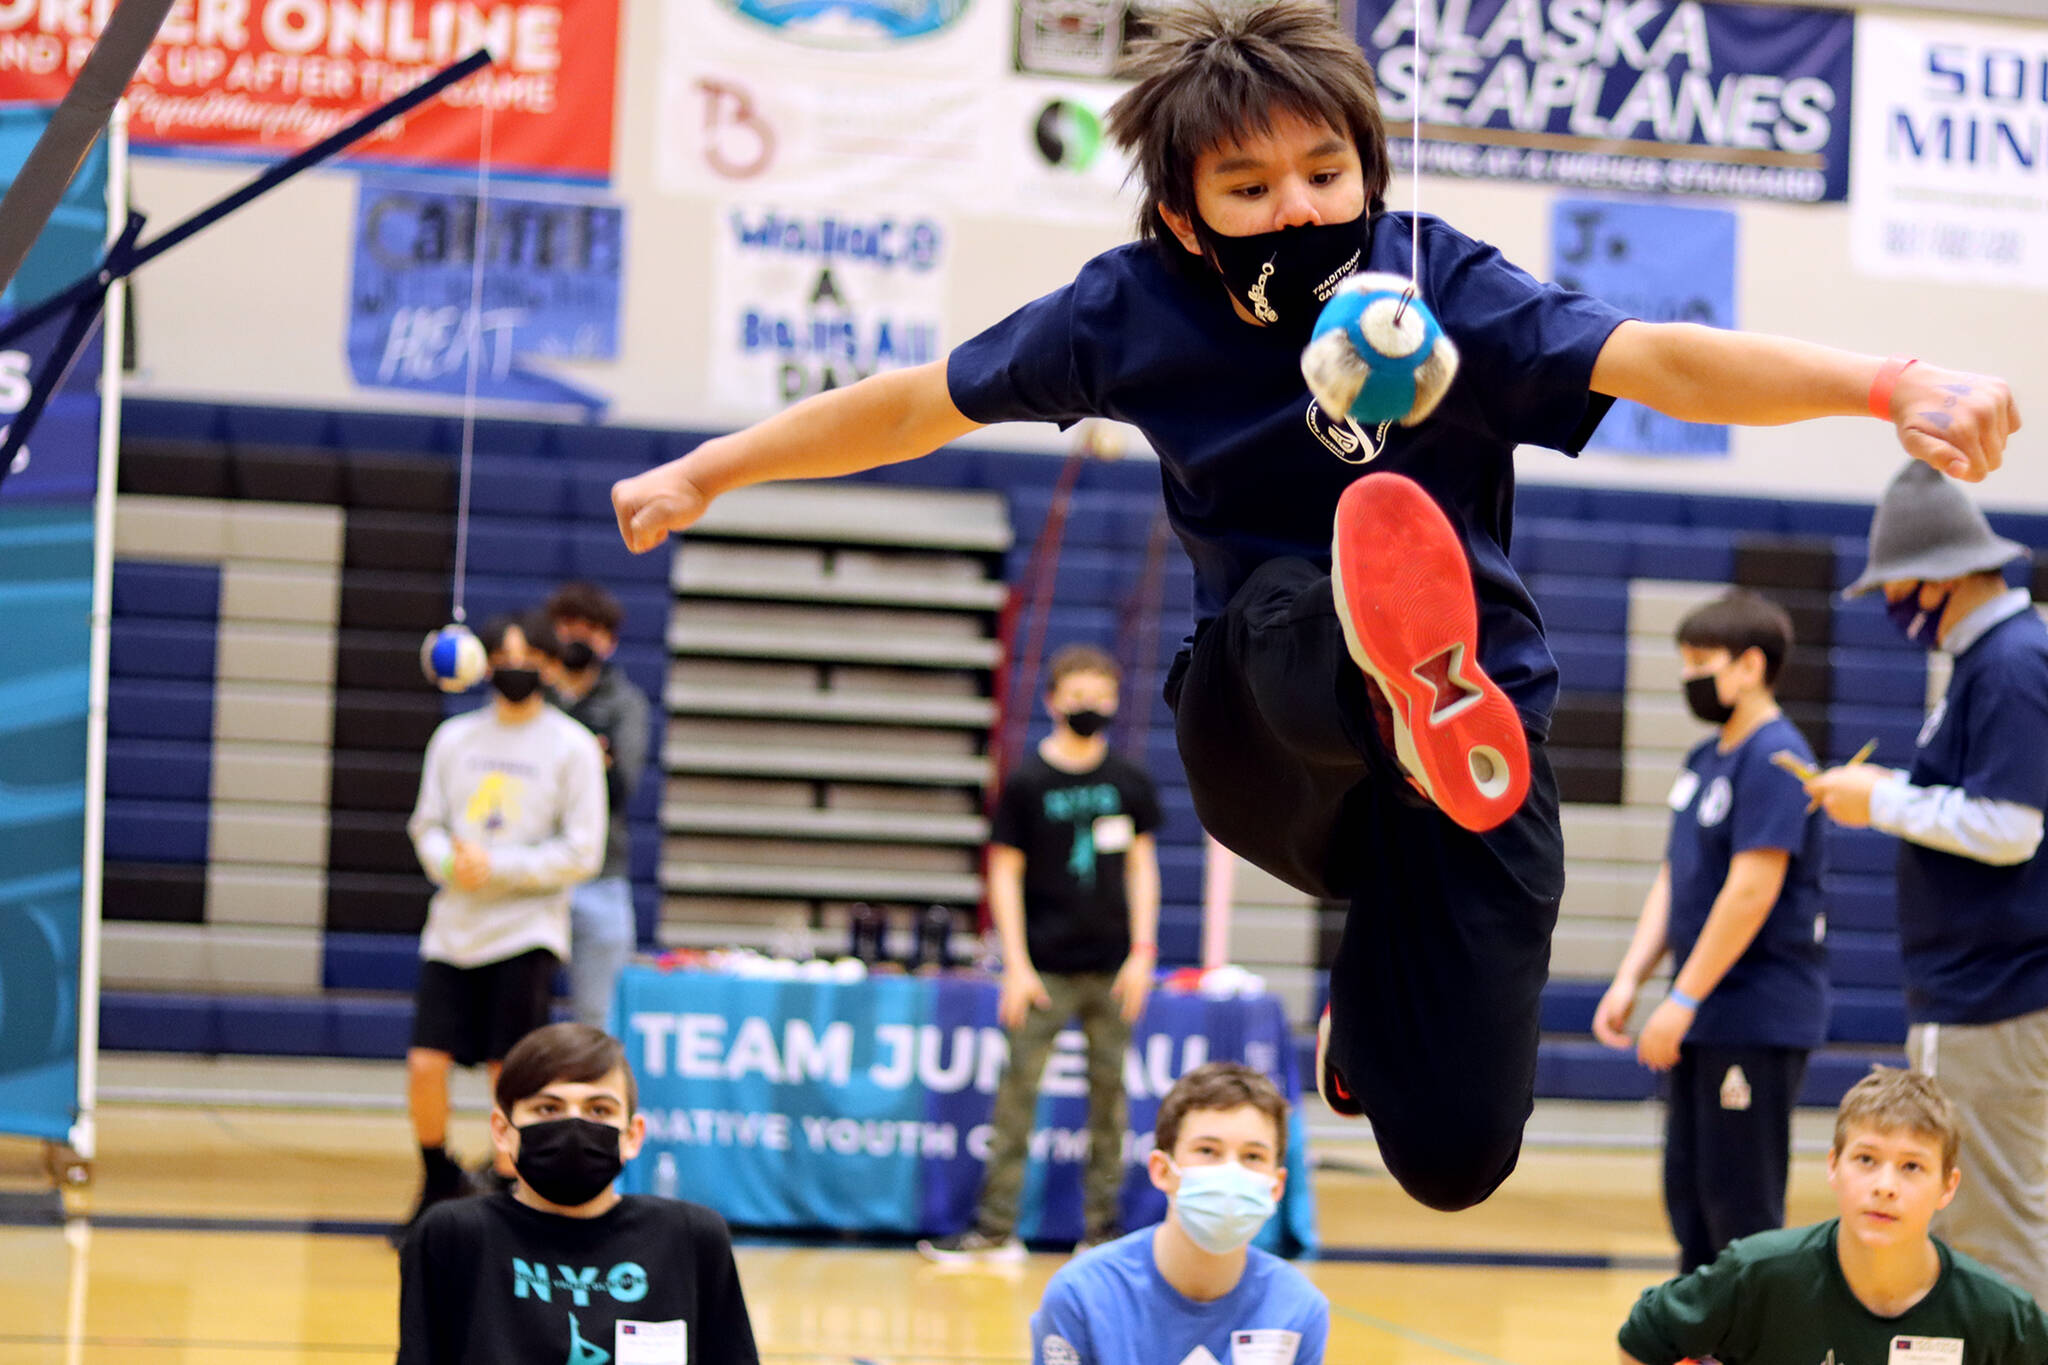 Donovan Jackson, 12, of Juneau competes in the one-foot high kick during the 2022 Traditional Games on April 2, 2022. The games were held at Thunder Mountain High School. (Ben Hohenstatt / Juneau Empire file)